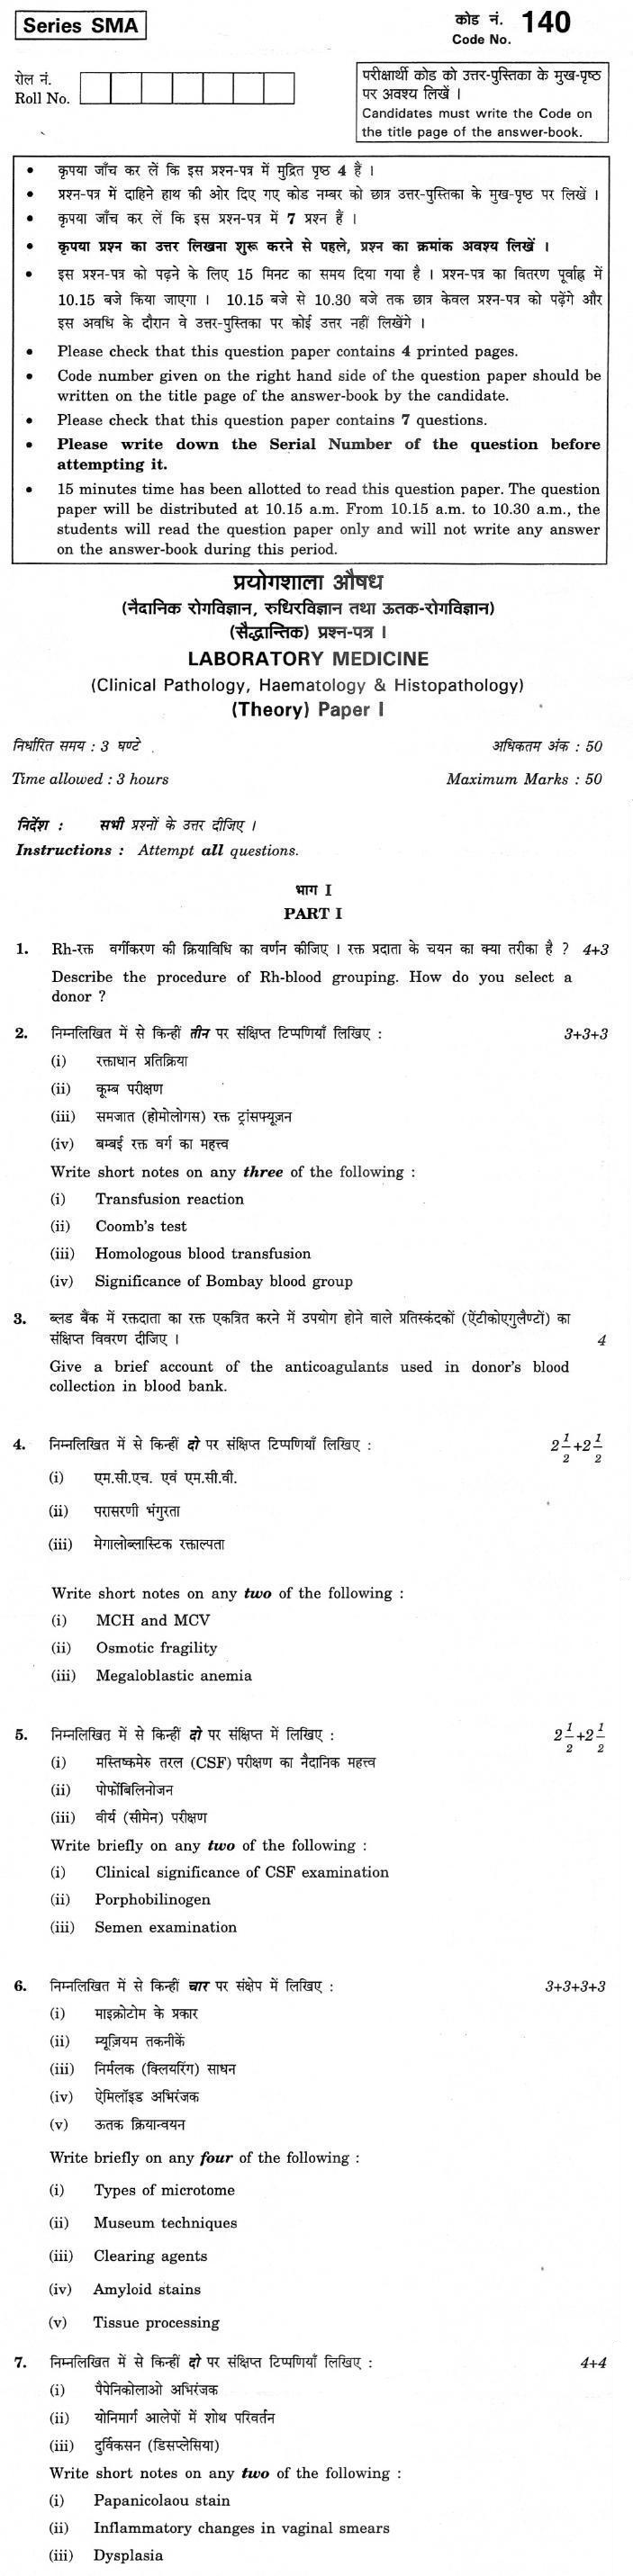 CBSE Class XII Previous Year Question Paper 2012 Laboratory Medicine Paper I